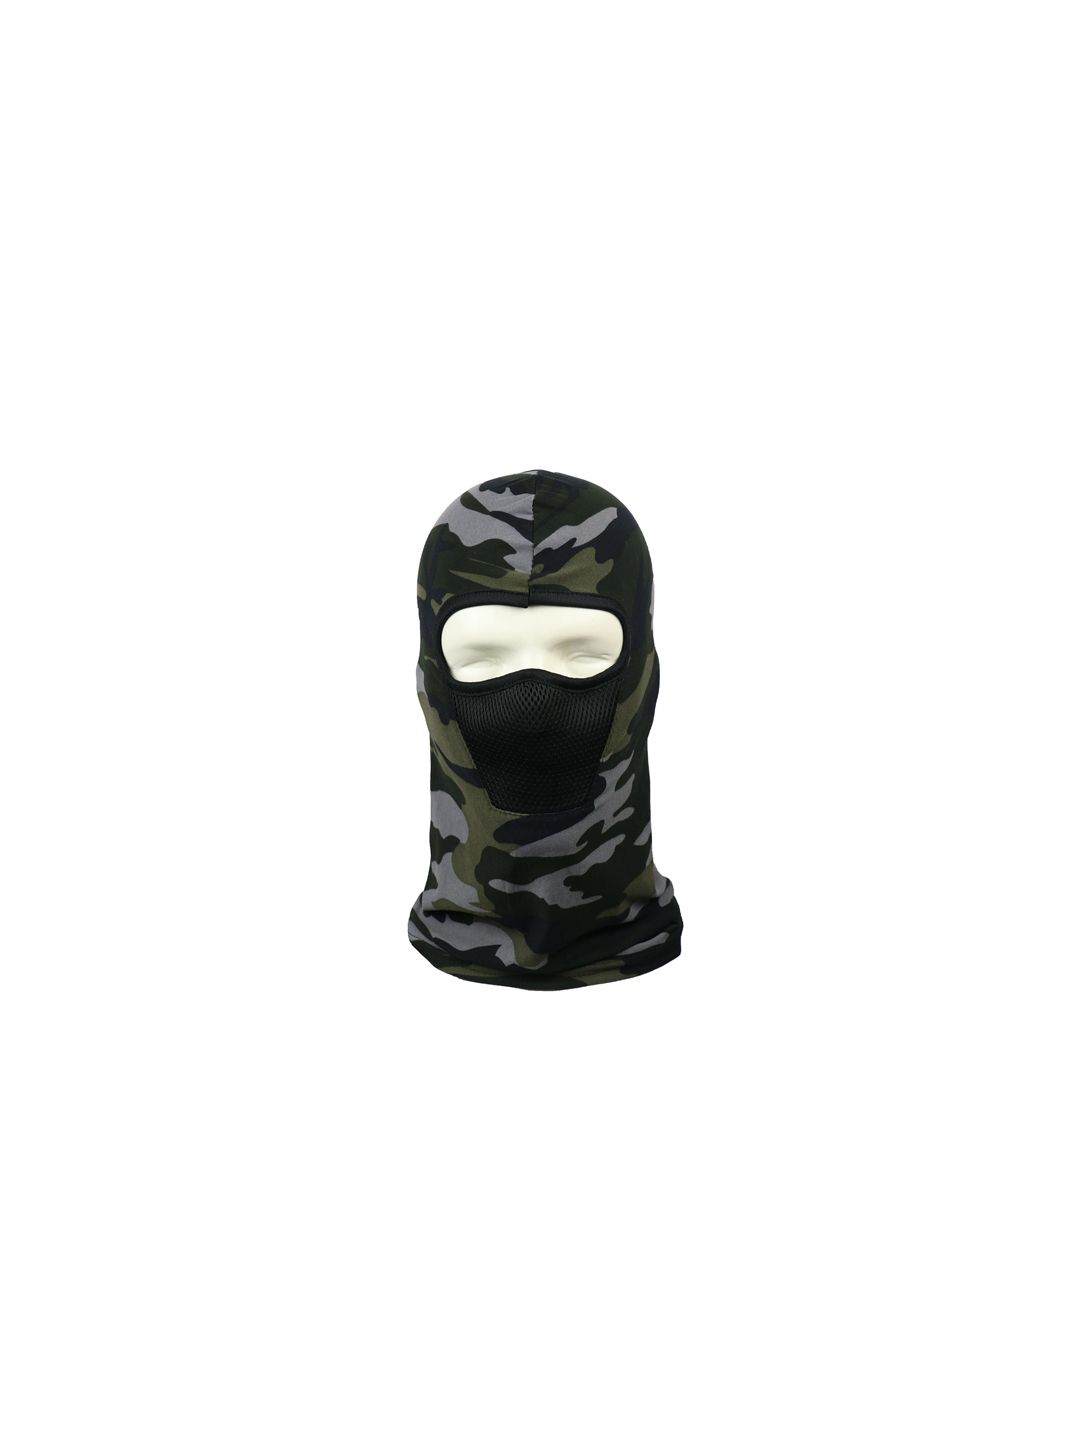 iSWEVEN Unisex Black & Olive Green Camo Printed Balaclava Price in India